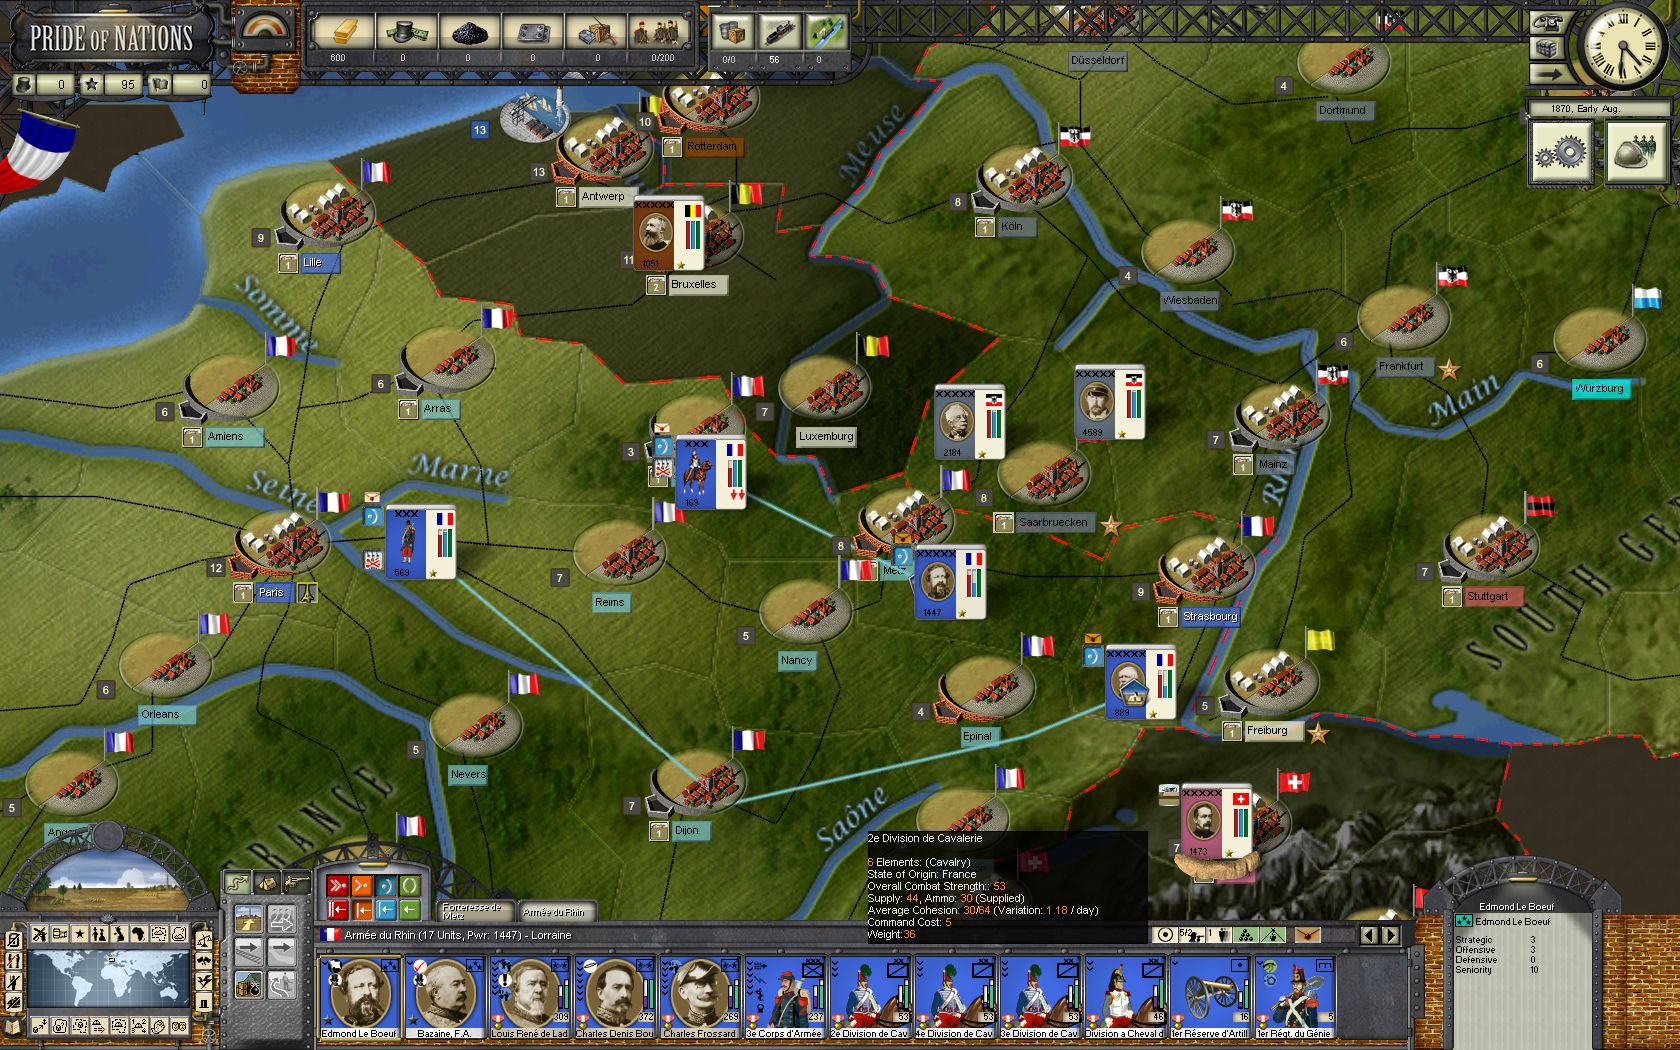 Pride of Nations - The Franco-Prussian War 1870 DLC Steam CD Key 4.38 usd